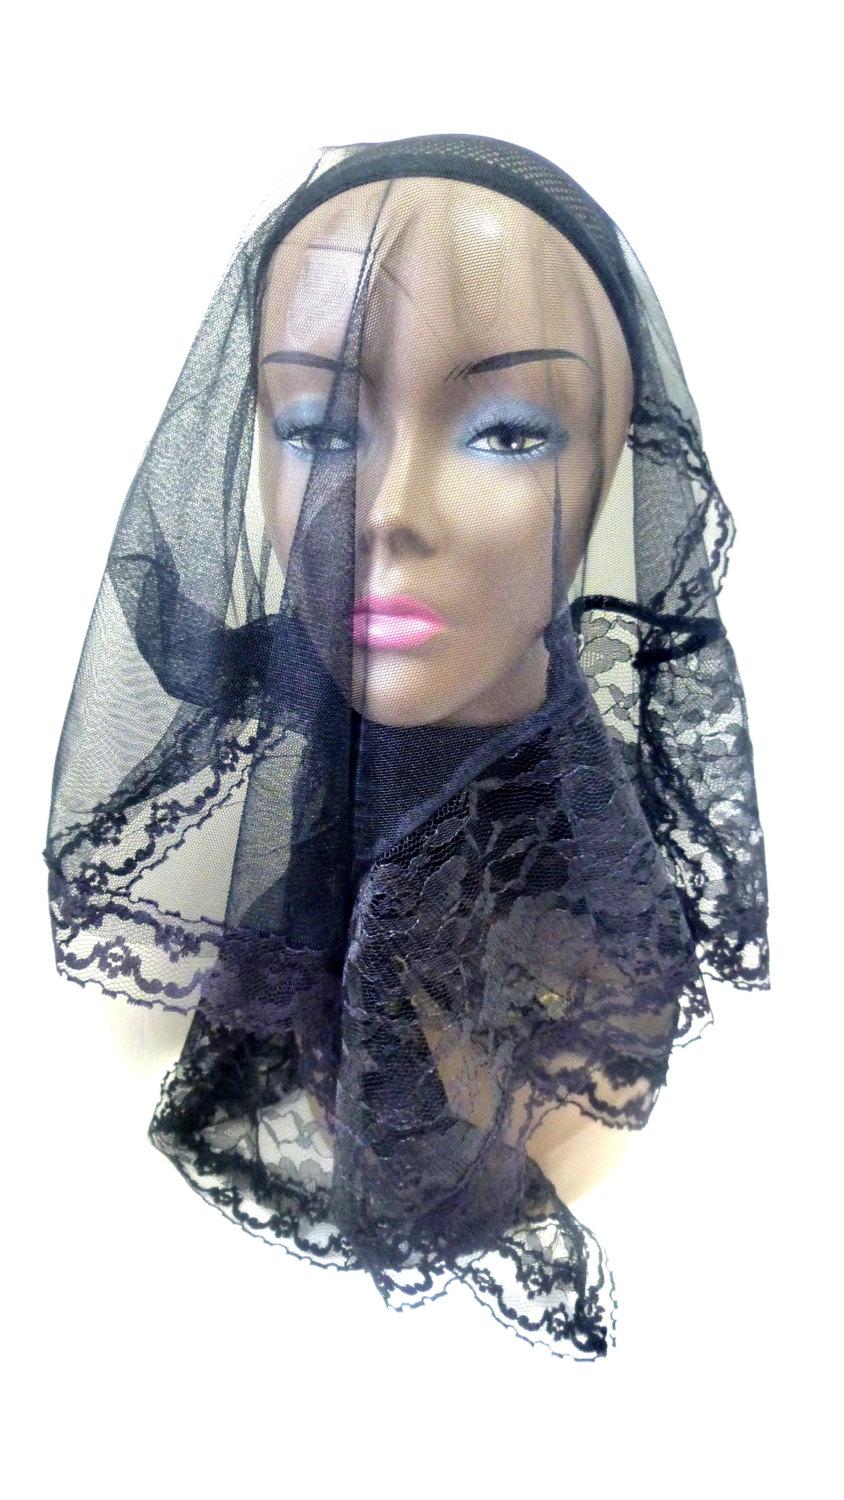 Wedding - Funeral Veil, Chapel Head Covering, Gothic Bridal Accessory Sheer Black Nylon and Lace Scarf, X Long